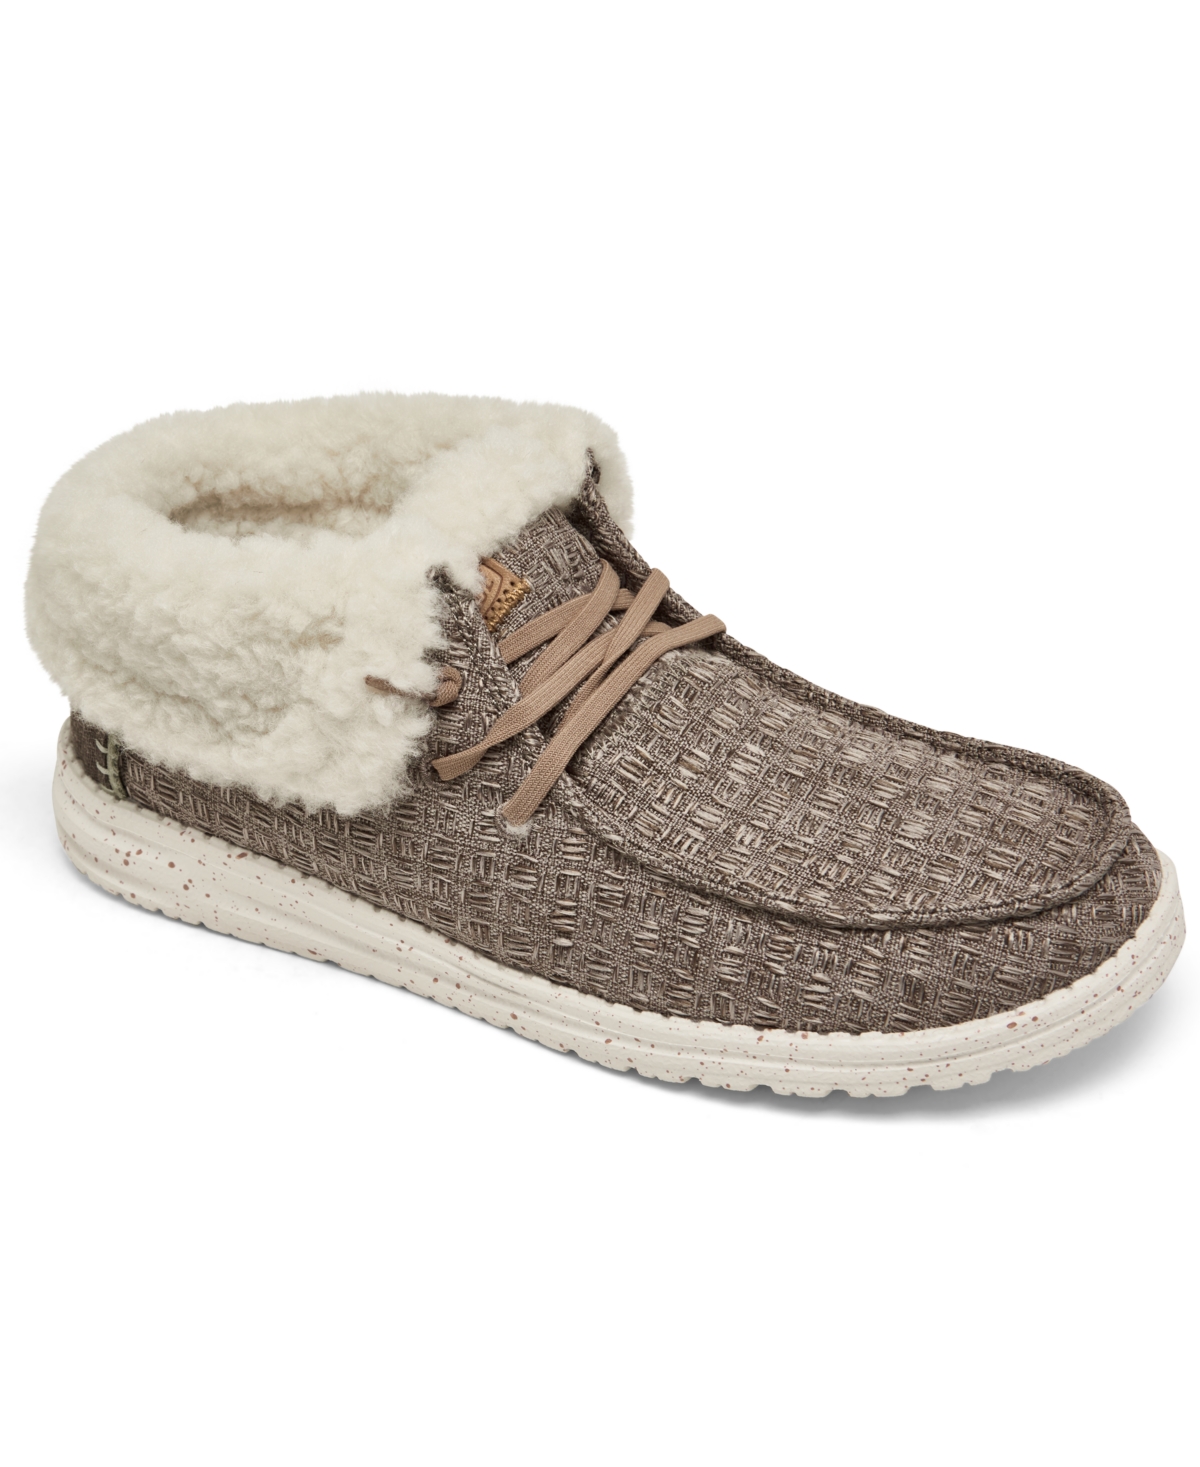 Women's Wendy Fold Casual Moccasin Sneakers from Finish Line - Walnut